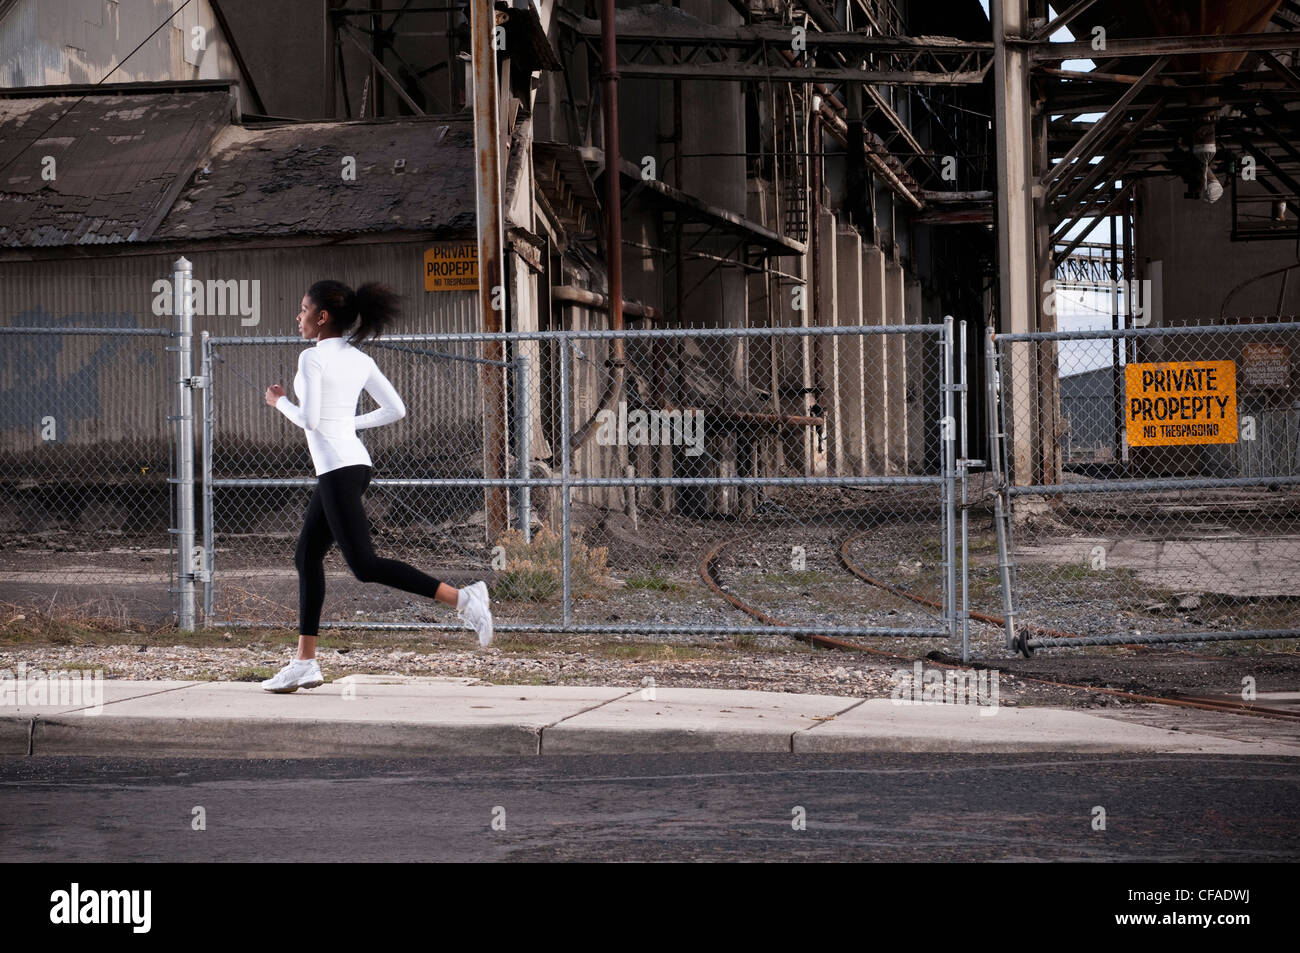 Woman running on industrial city street Banque D'Images